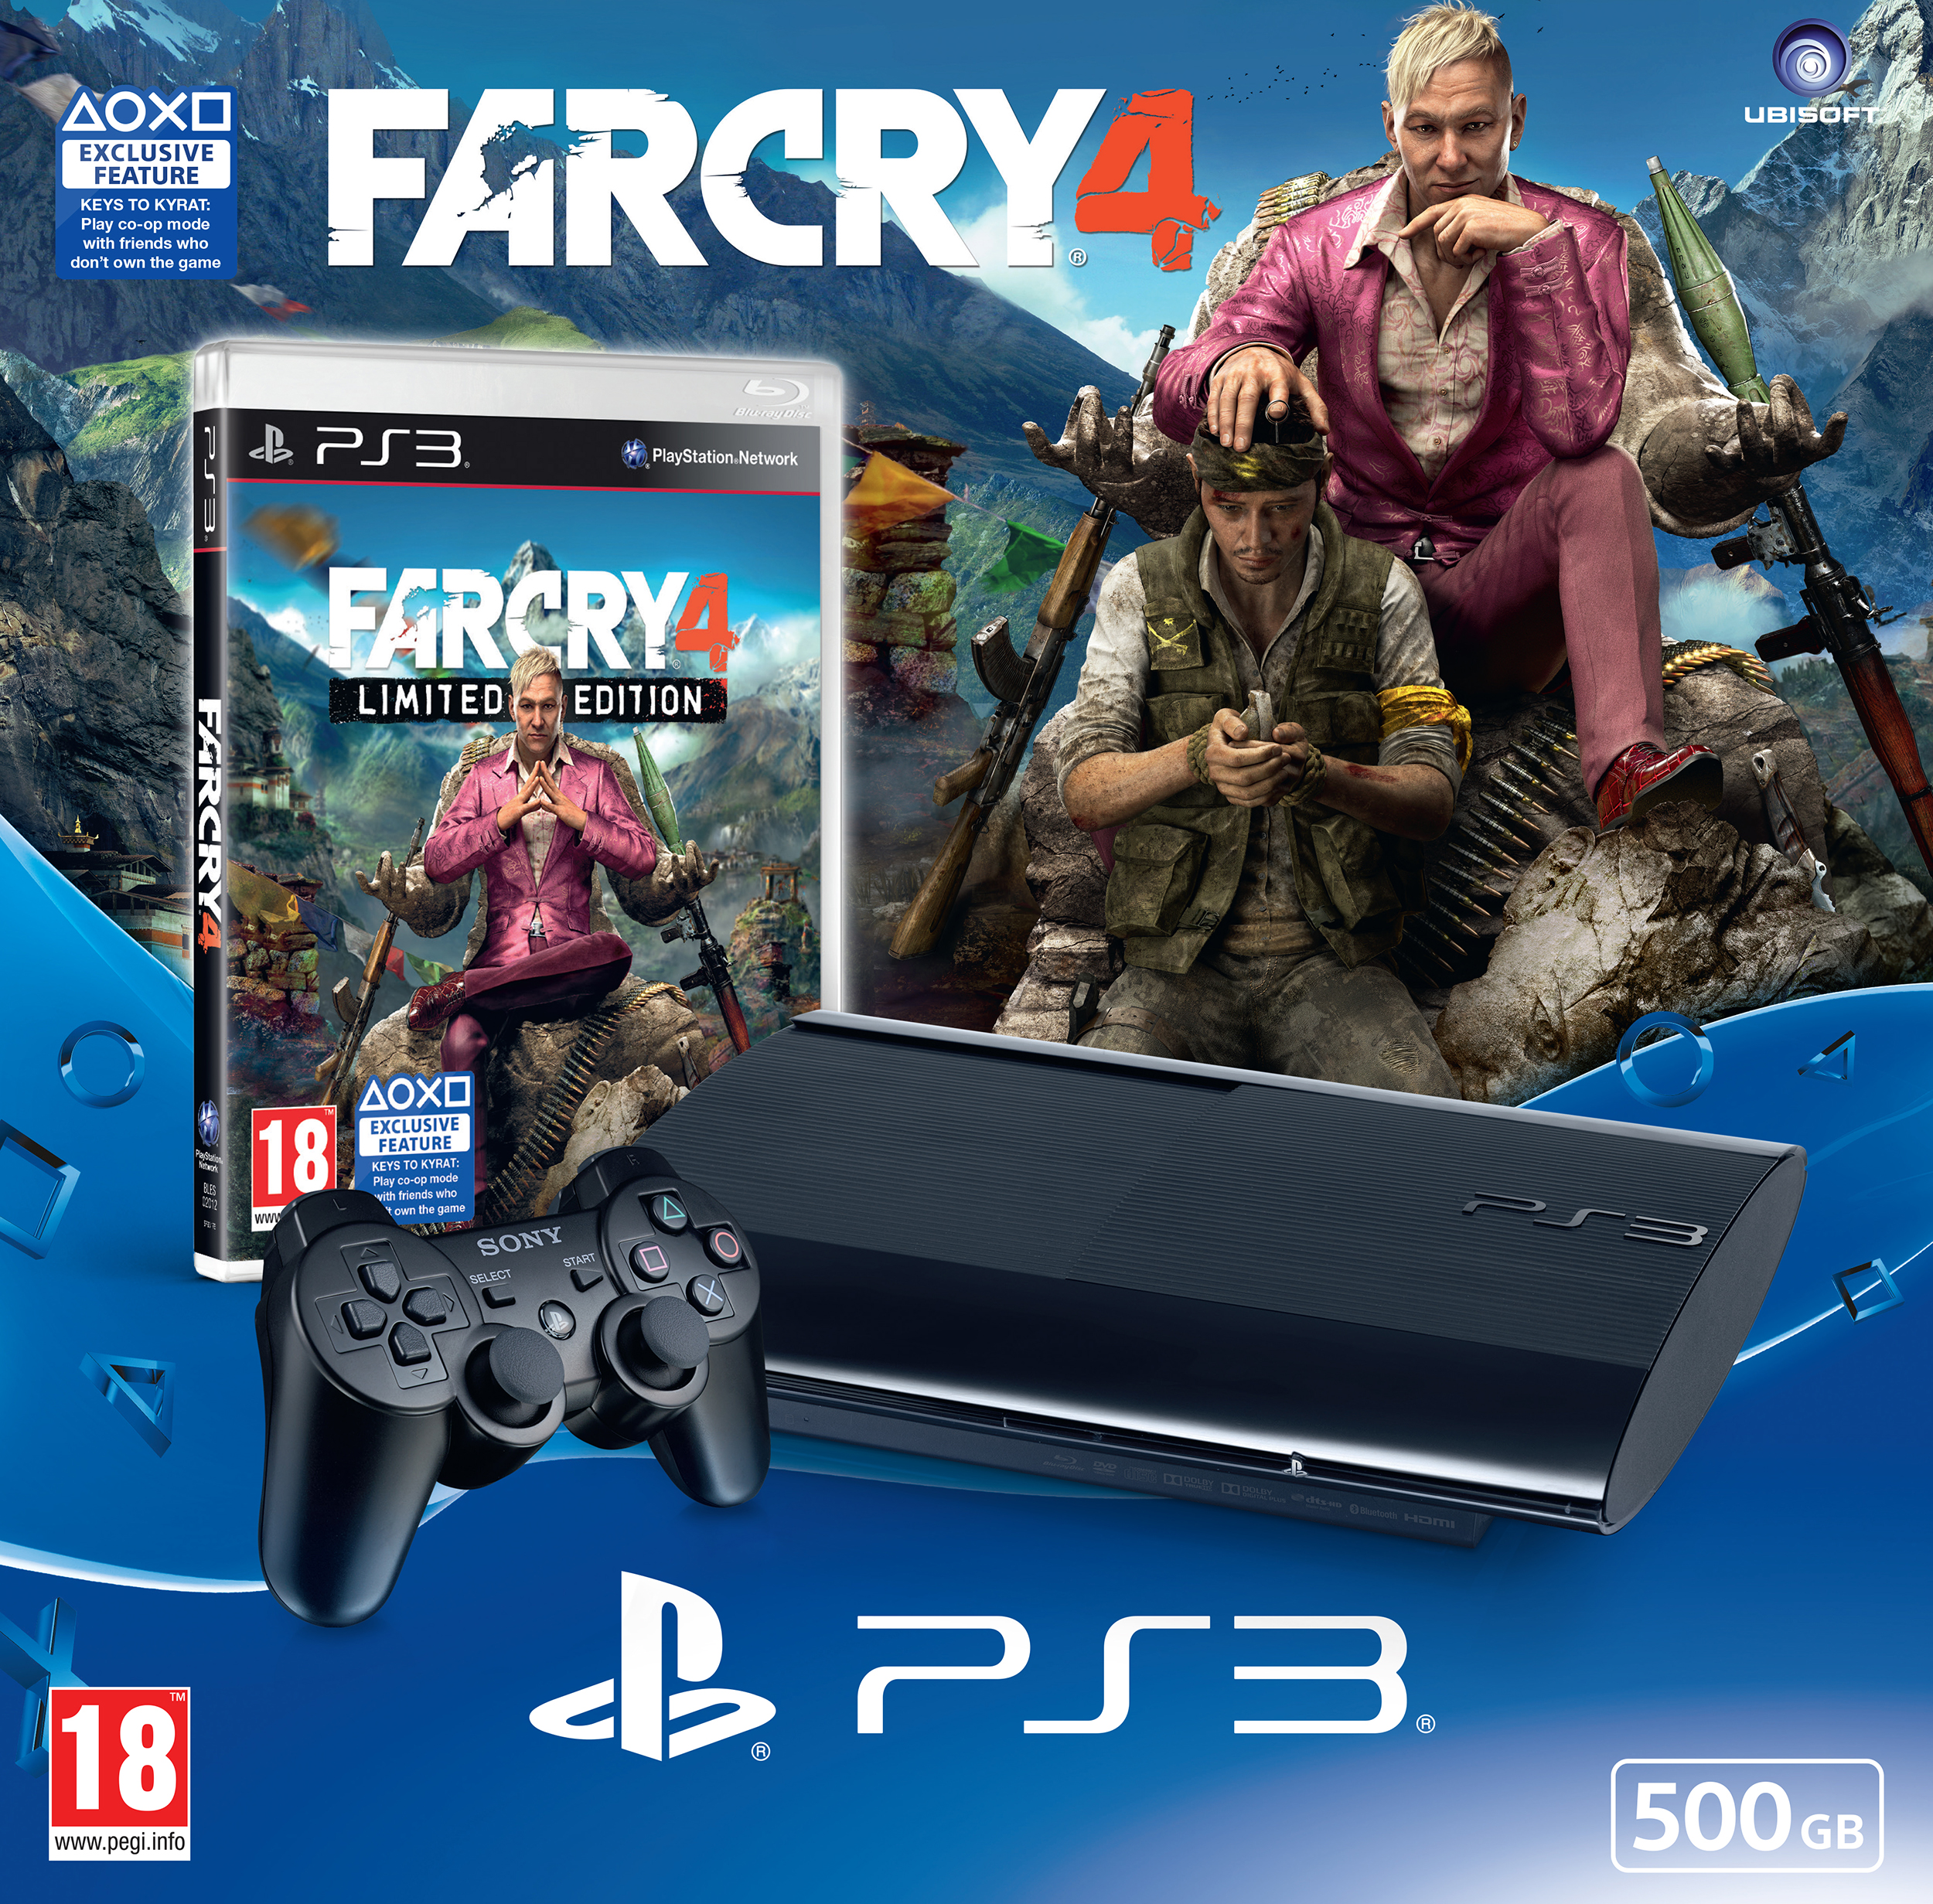 Far Cry 4 Pagan Min King Of Kyrat Trailer Released European Ps4 Ps3 Bundles Revealed The Koalition